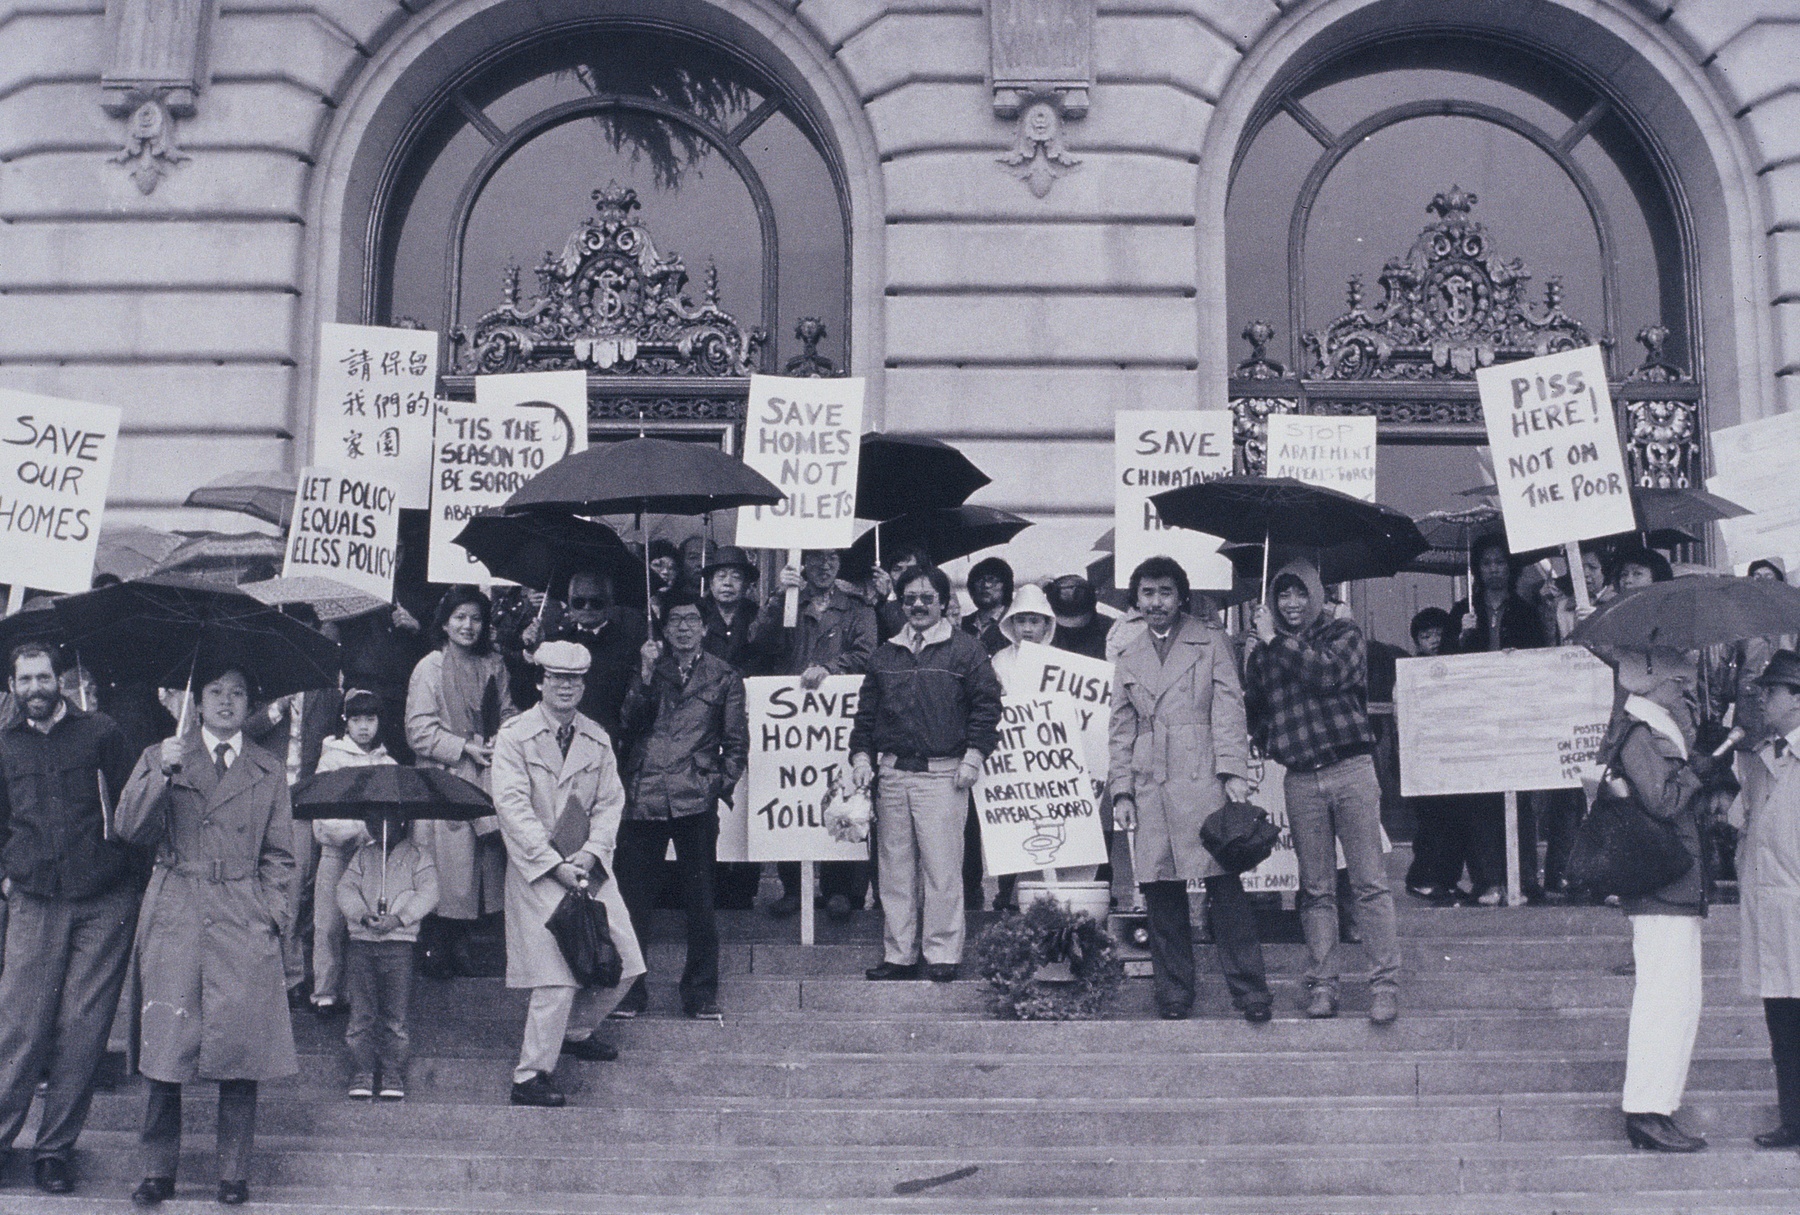 Black and white photo of protestors standing on the steps in front of San Francisco City Hall holding signs